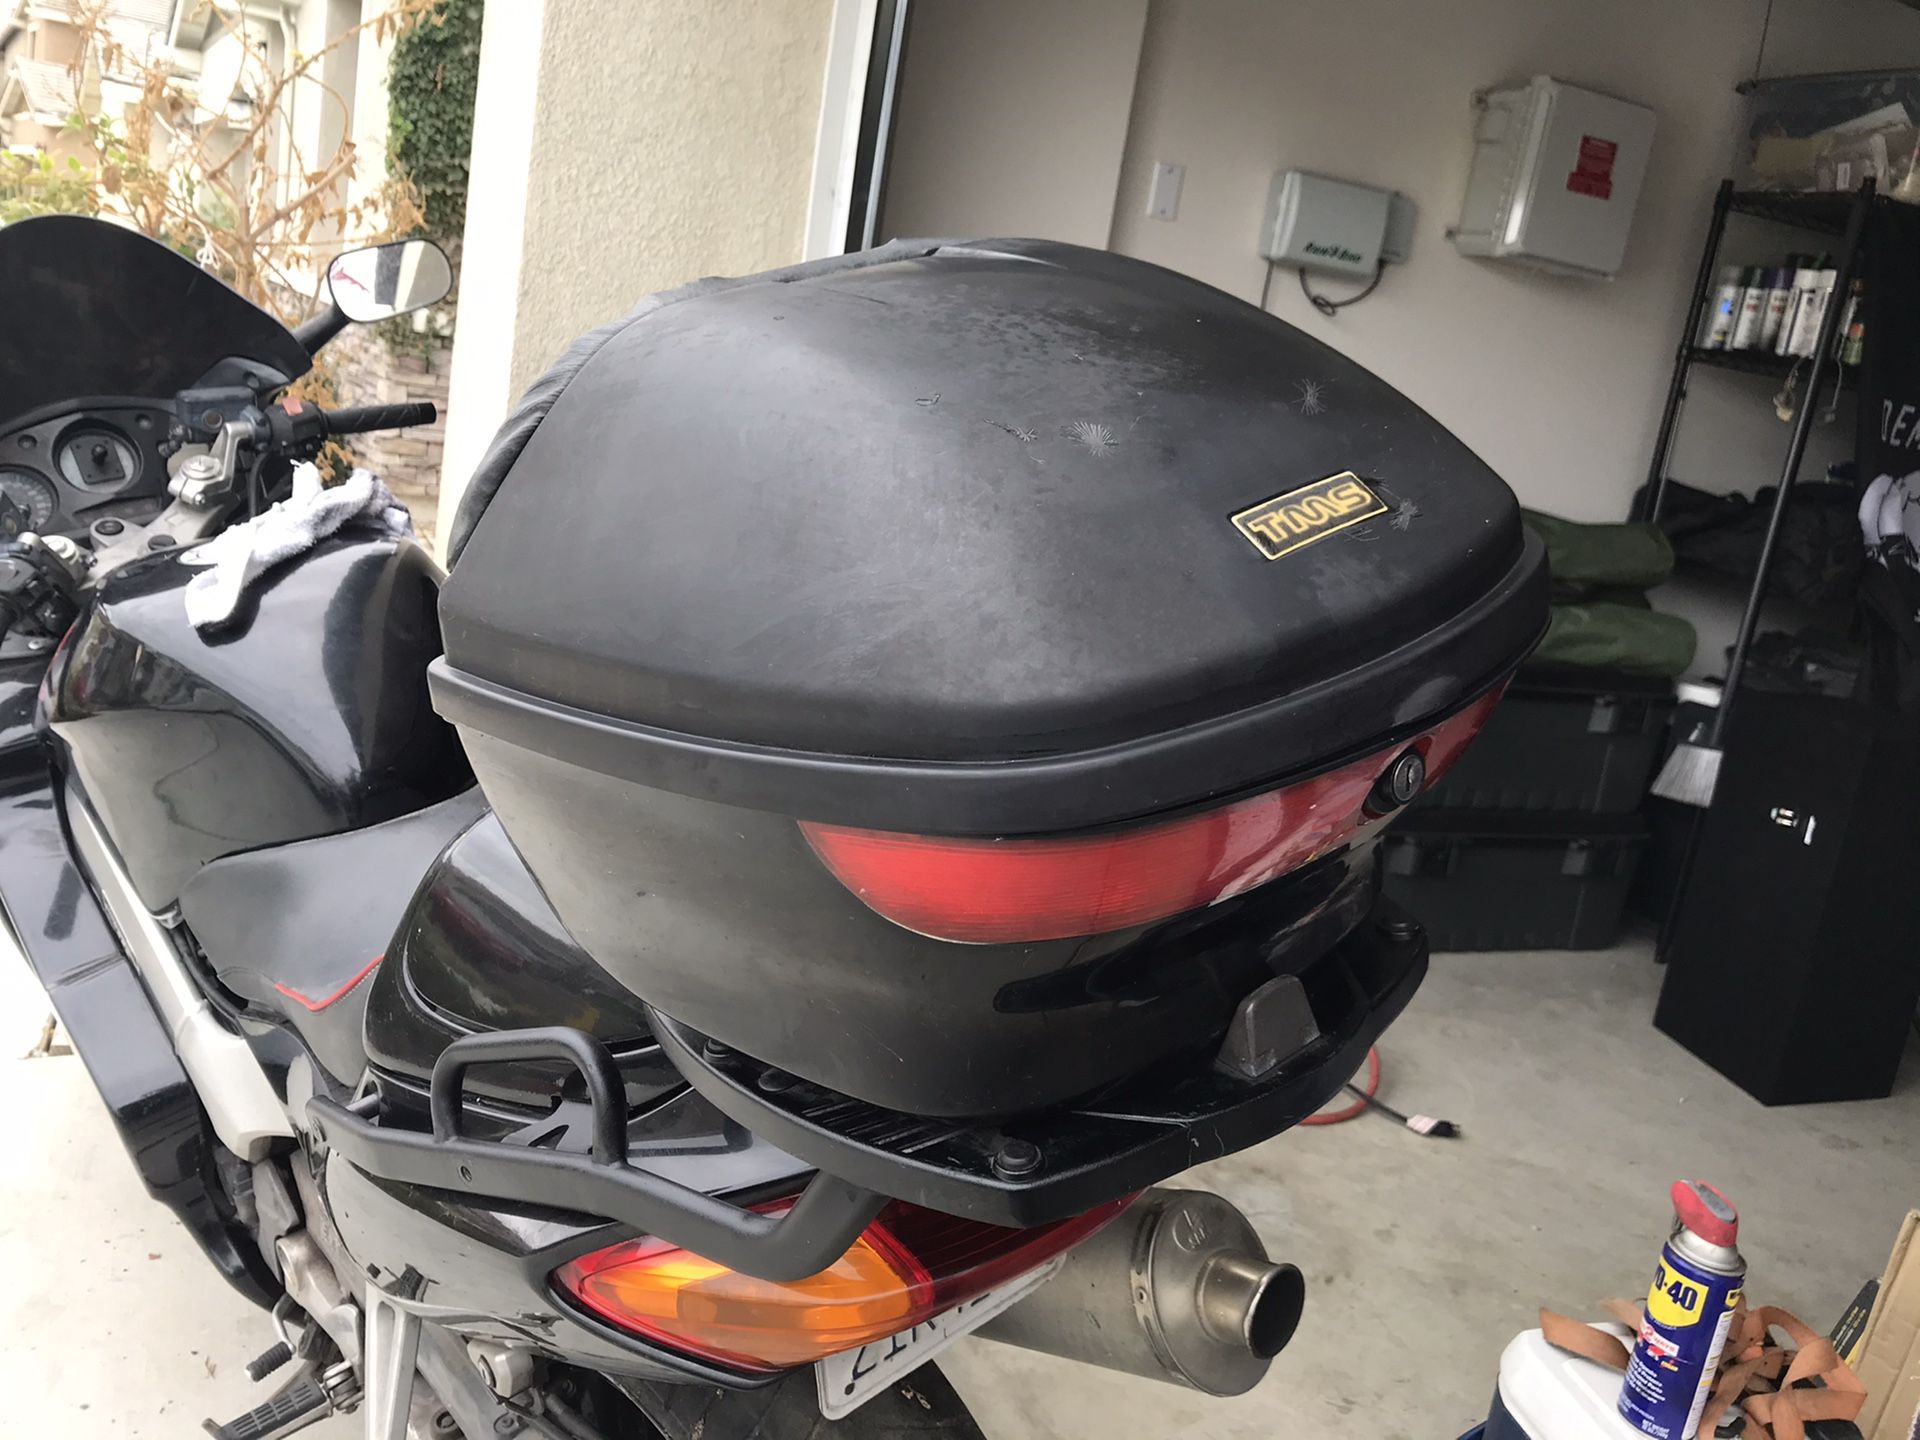 Motorcycle trunk, case, bags